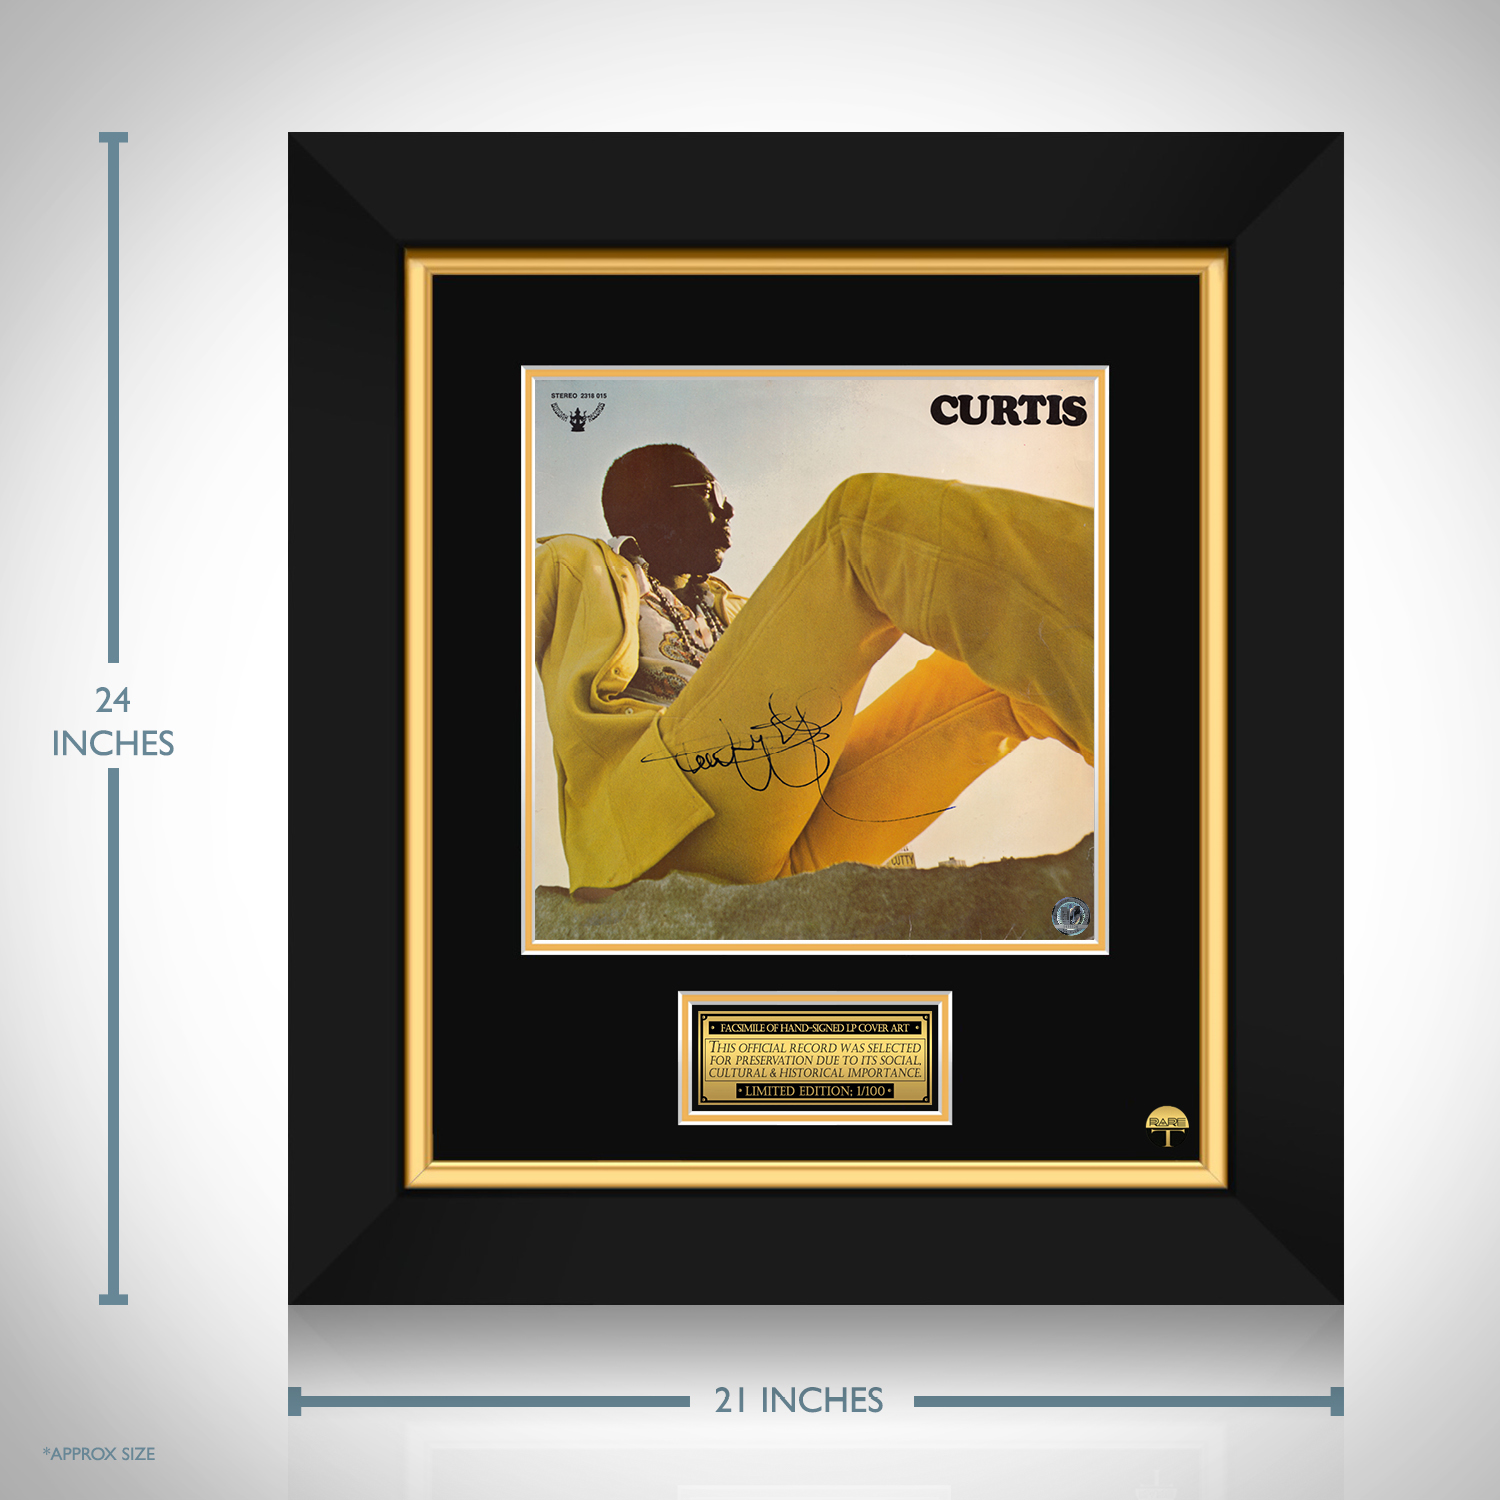 Curtis Mayfield - Curtis LP Cover Limited Signature Edition Custom 